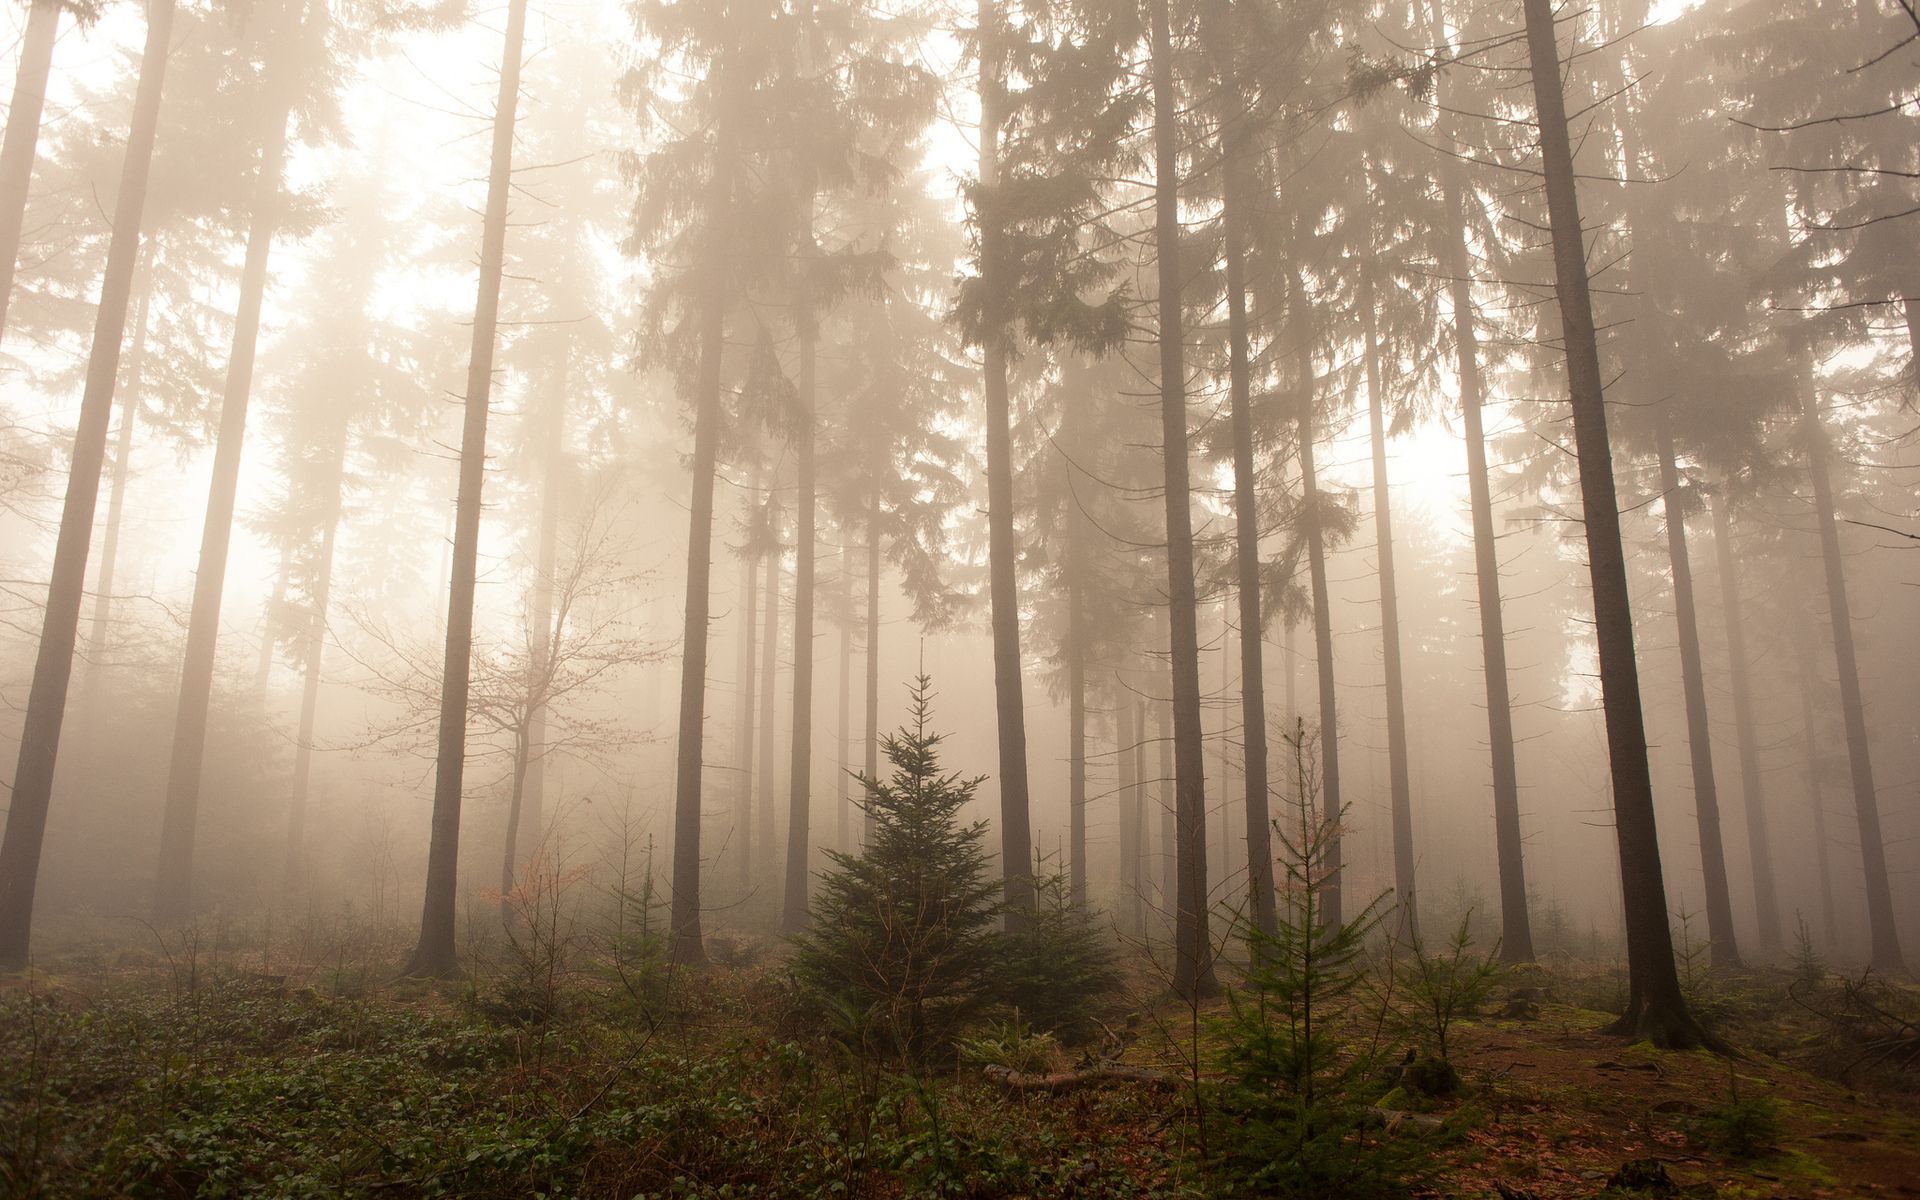 A forest with fog in the background - Fog